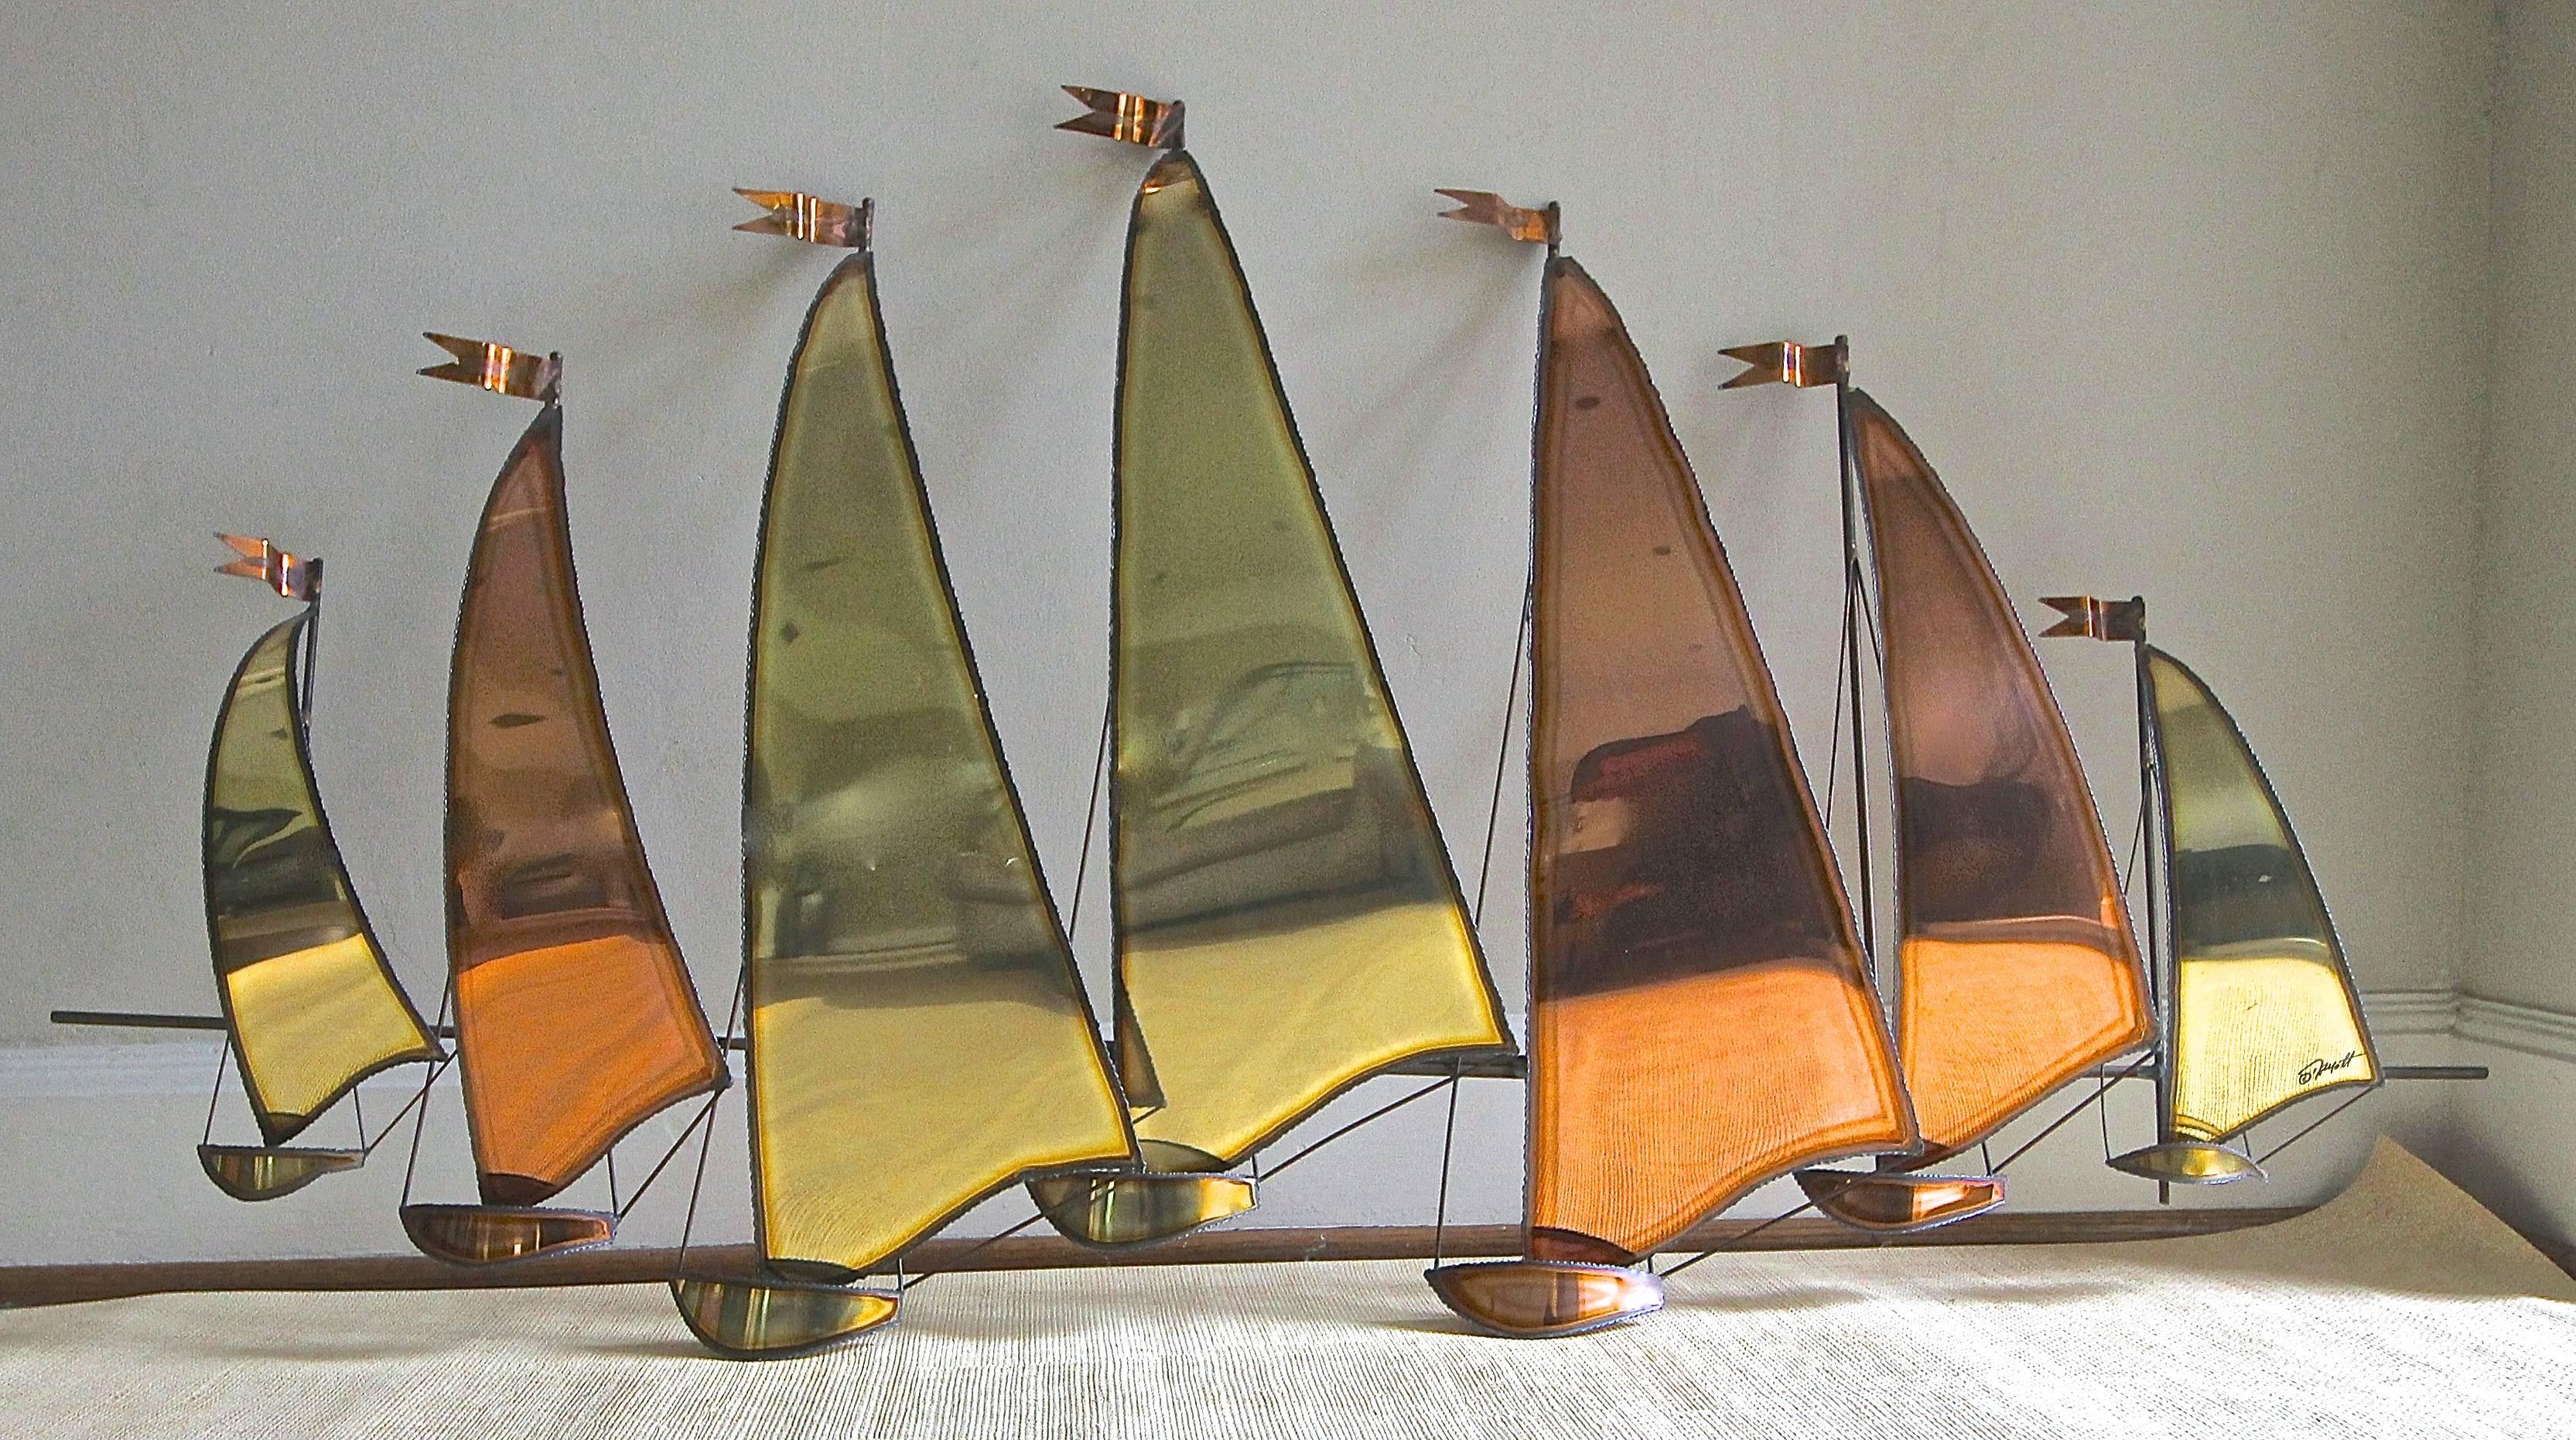 Large copper and brass handcrafted wall sculpture with a sail boat design. Signed. See close up for signature.